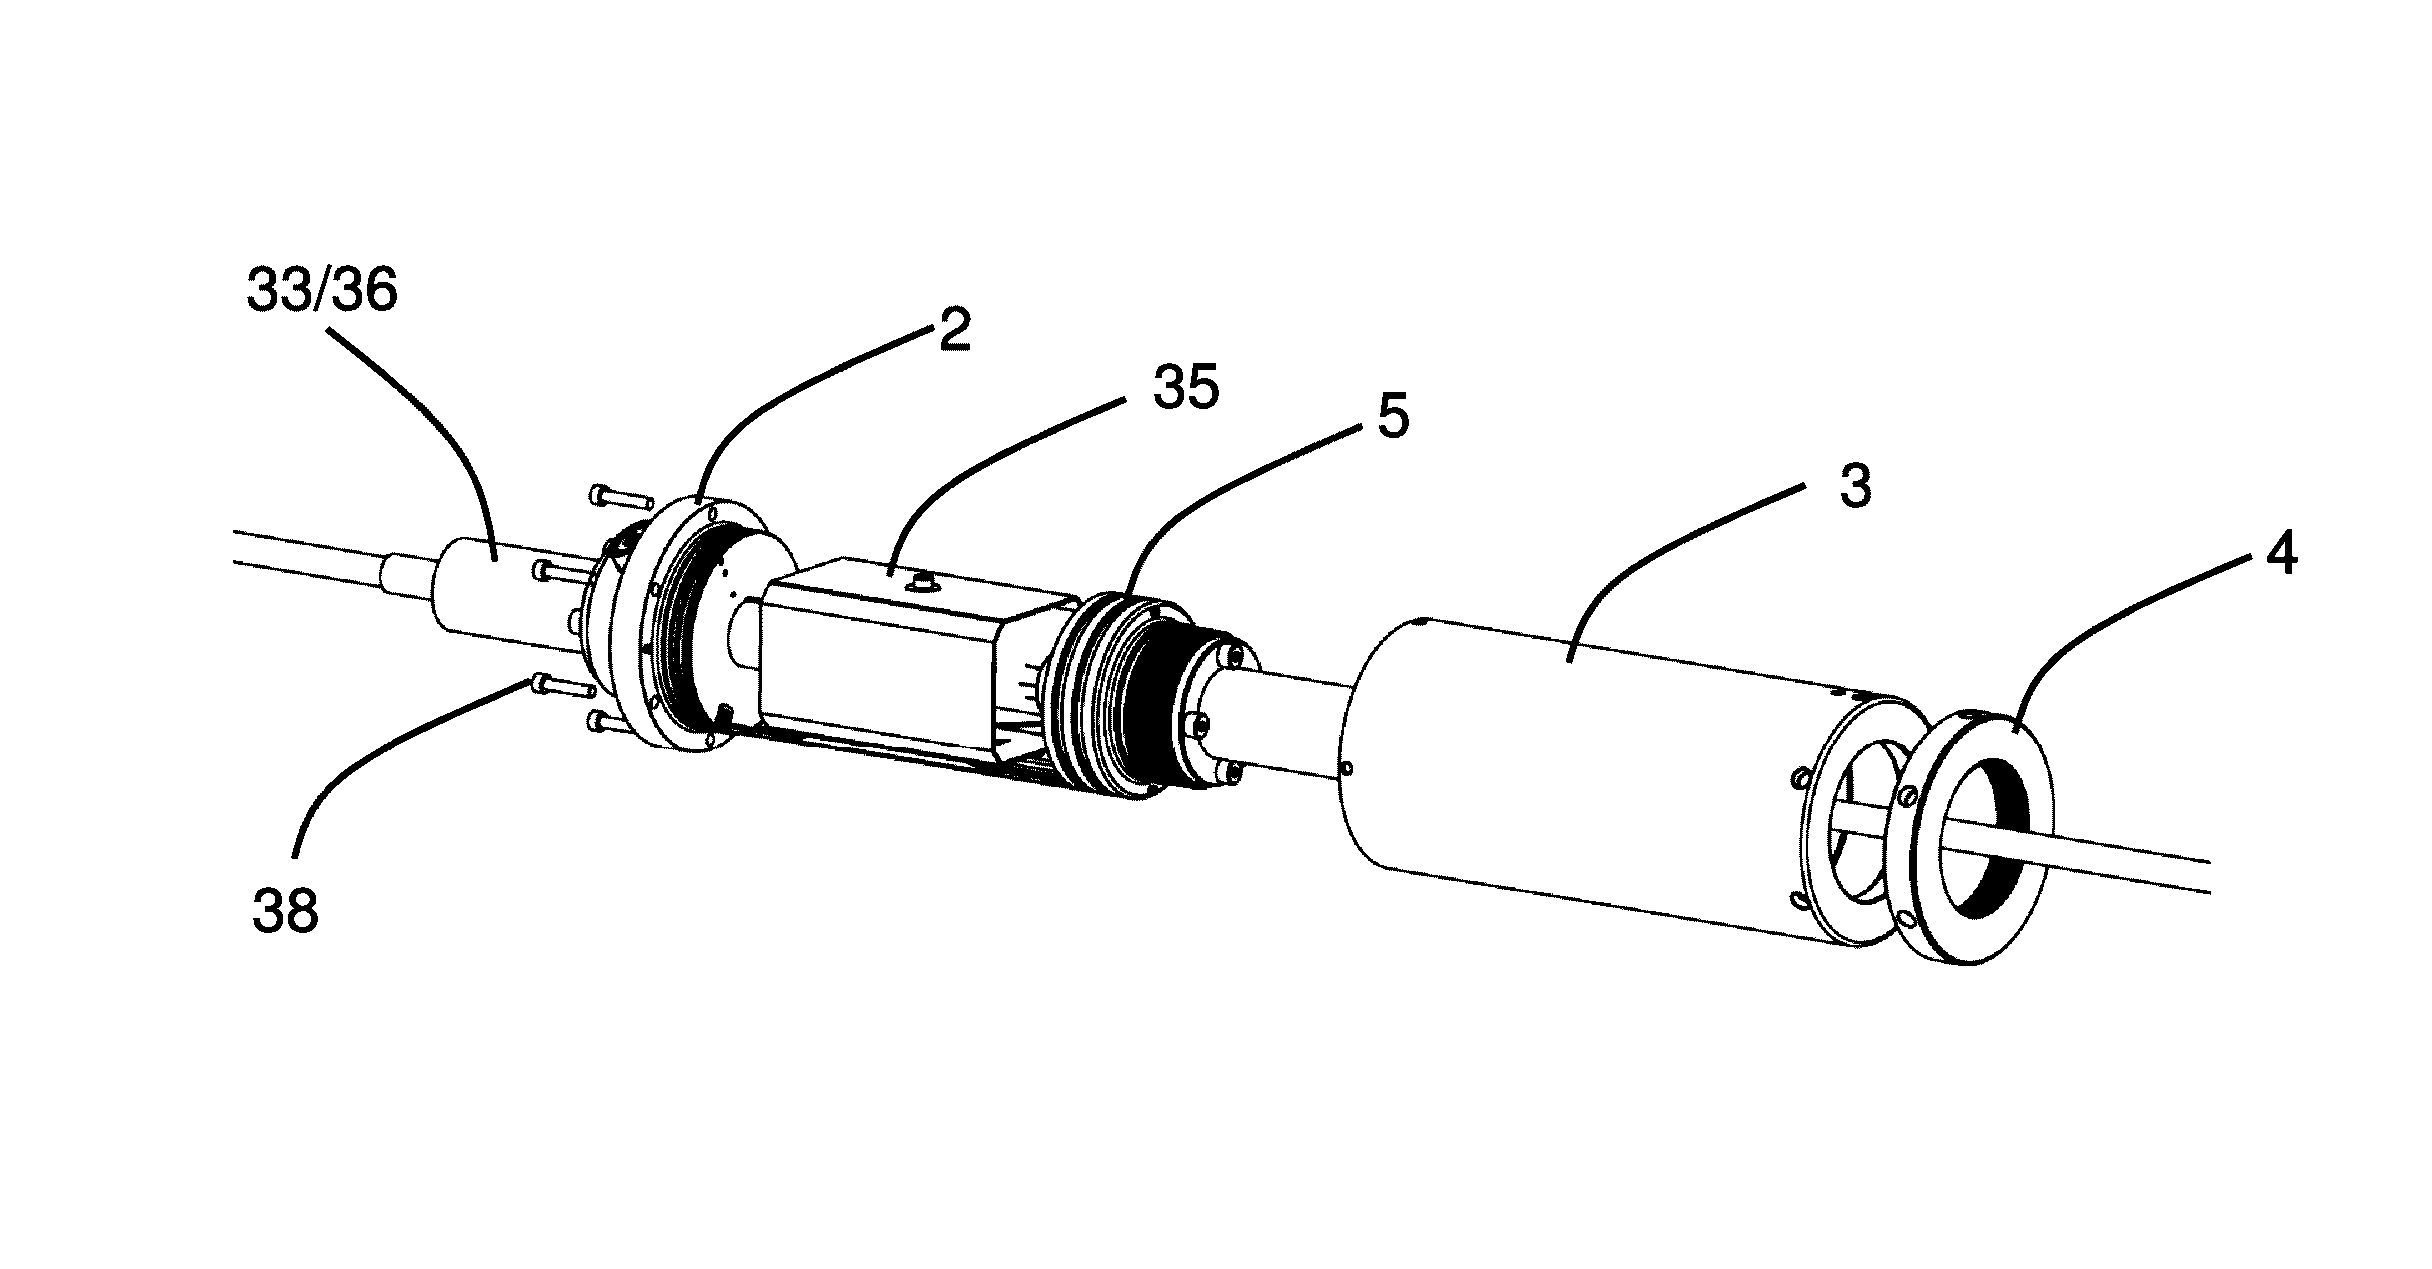 Cylindrical housing with locking ring